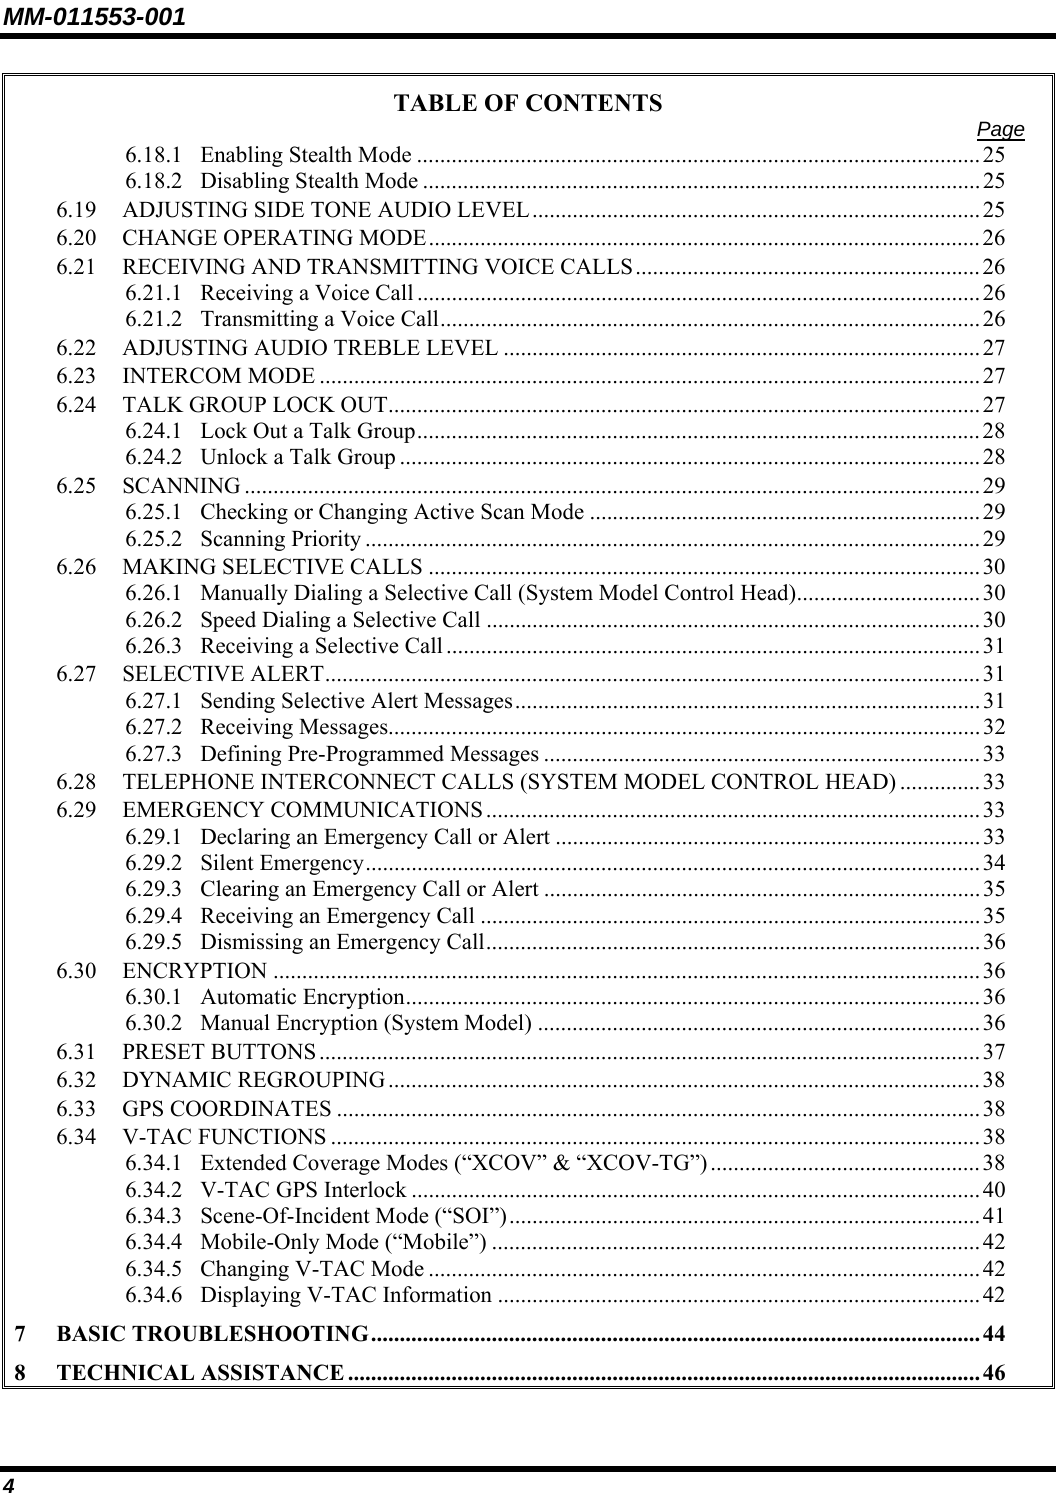 MM-011553-001 TABLE OF CONTENTS  Page 6.18.1 Enabling Stealth Mode ..................................................................................................25 6.18.2 Disabling Stealth Mode .................................................................................................25 6.19 ADJUSTING SIDE TONE AUDIO LEVEL.............................................................................. 25 6.20 CHANGE OPERATING MODE................................................................................................26 6.21 RECEIVING AND TRANSMITTING VOICE CALLS............................................................26 6.21.1 Receiving a Voice Call .................................................................................................. 26 6.21.2 Transmitting a Voice Call.............................................................................................. 26 6.22 ADJUSTING AUDIO TREBLE LEVEL ................................................................................... 27 6.23 INTERCOM MODE ...................................................................................................................27 6.24 TALK GROUP LOCK OUT....................................................................................................... 27 6.24.1 Lock Out a Talk Group.................................................................................................. 28 6.24.2 Unlock a Talk Group .....................................................................................................28 6.25 SCANNING ................................................................................................................................29 6.25.1 Checking or Changing Active Scan Mode ....................................................................29 6.25.2 Scanning Priority ........................................................................................................... 29 6.26 MAKING SELECTIVE CALLS ................................................................................................30 6.26.1 Manually Dialing a Selective Call (System Model Control Head)................................30 6.26.2 Speed Dialing a Selective Call ......................................................................................30 6.26.3 Receiving a Selective Call .............................................................................................31 6.27 SELECTIVE ALERT..................................................................................................................31 6.27.1 Sending Selective Alert Messages.................................................................................31 6.27.2 Receiving Messages.......................................................................................................32 6.27.3 Defining Pre-Programmed Messages ............................................................................33 6.28 TELEPHONE INTERCONNECT CALLS (SYSTEM MODEL CONTROL HEAD) ..............33 6.29 EMERGENCY COMMUNICATIONS......................................................................................33 6.29.1 Declaring an Emergency Call or Alert ..........................................................................33 6.29.2 Silent Emergency........................................................................................................... 34 6.29.3 Clearing an Emergency Call or Alert ............................................................................35 6.29.4 Receiving an Emergency Call .......................................................................................35 6.29.5 Dismissing an Emergency Call......................................................................................36 6.30 ENCRYPTION ...........................................................................................................................36 6.30.1 Automatic Encryption.................................................................................................... 36 6.30.2 Manual Encryption (System Model) ............................................................................. 36 6.31 PRESET BUTTONS...................................................................................................................37 6.32 DYNAMIC REGROUPING .......................................................................................................38 6.33 GPS COORDINATES ................................................................................................................38 6.34 V-TAC FUNCTIONS .................................................................................................................38 6.34.1 Extended Coverage Modes (“XCOV” &amp; “XCOV-TG”)............................................... 38 6.34.2 V-TAC GPS Interlock ...................................................................................................40 6.34.3 Scene-Of-Incident Mode (“SOI”)..................................................................................41 6.34.4 Mobile-Only Mode (“Mobile”) ..................................................................................... 42 6.34.5 Changing V-TAC Mode ................................................................................................42 6.34.6 Displaying V-TAC Information ....................................................................................42 7 BASIC TROUBLESHOOTING.......................................................................................................... 44 8 TECHNICAL ASSISTANCE .............................................................................................................. 46 4 